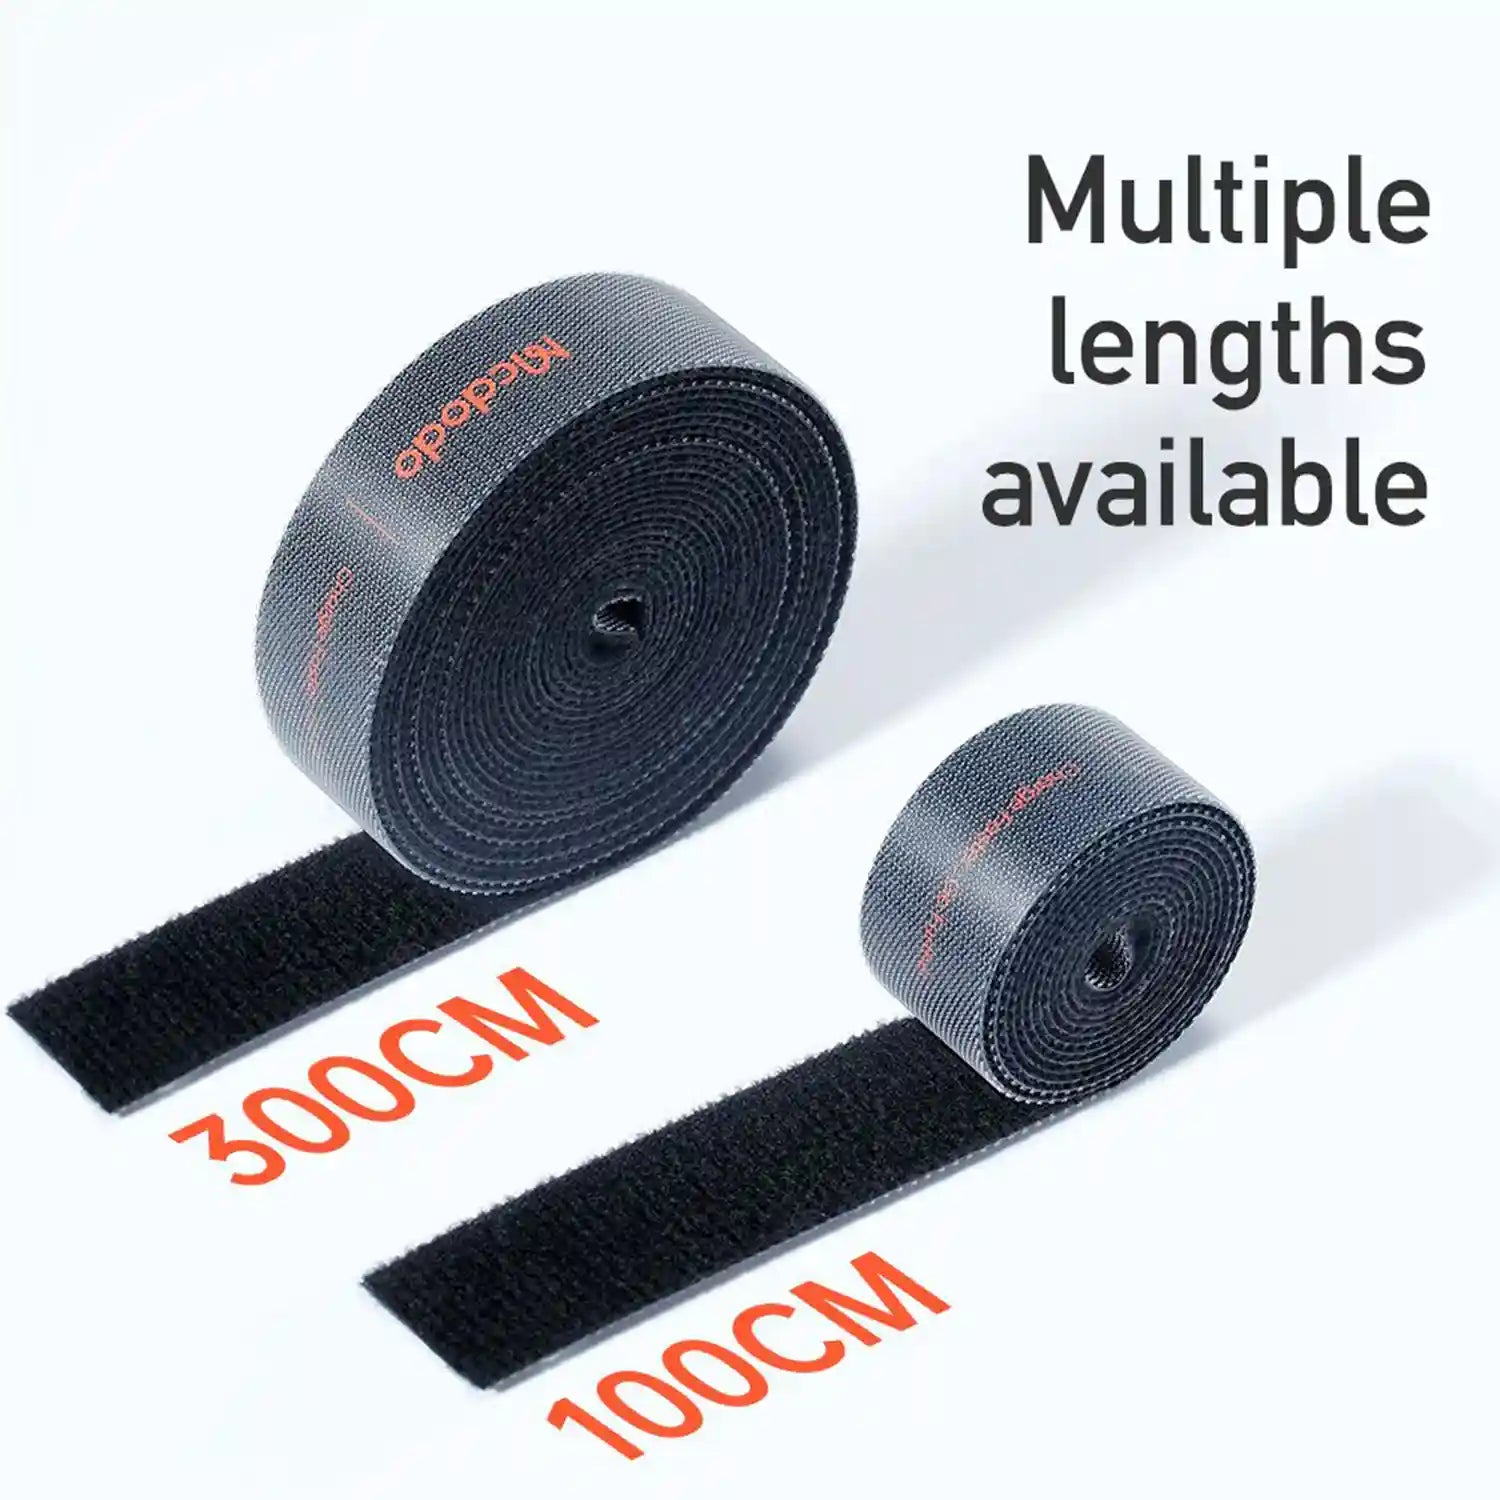 Mcdodo Velcro Ctraps for Cable 1m / 3m, Black